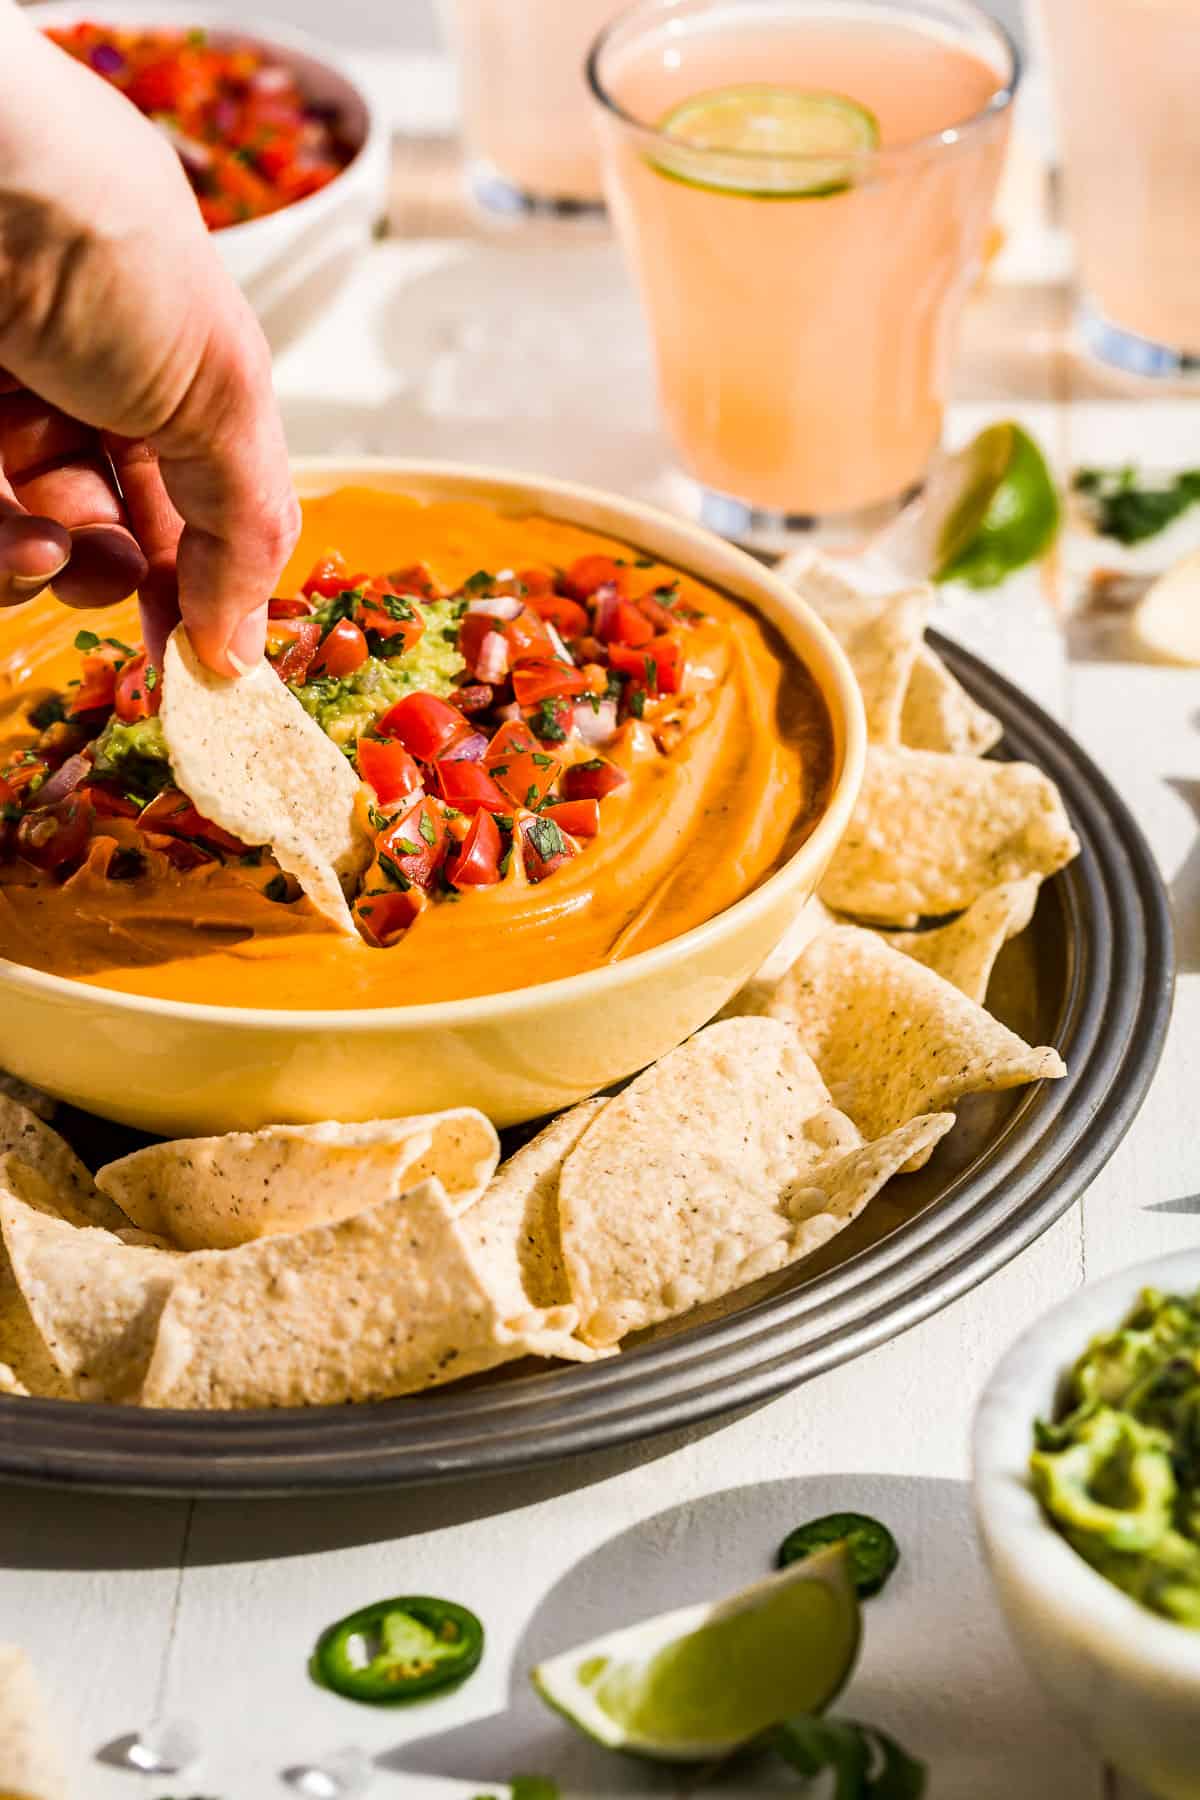 A hand dipping a corn chip into the bowl of vegan queso surrounded by chips with drinks in the background.